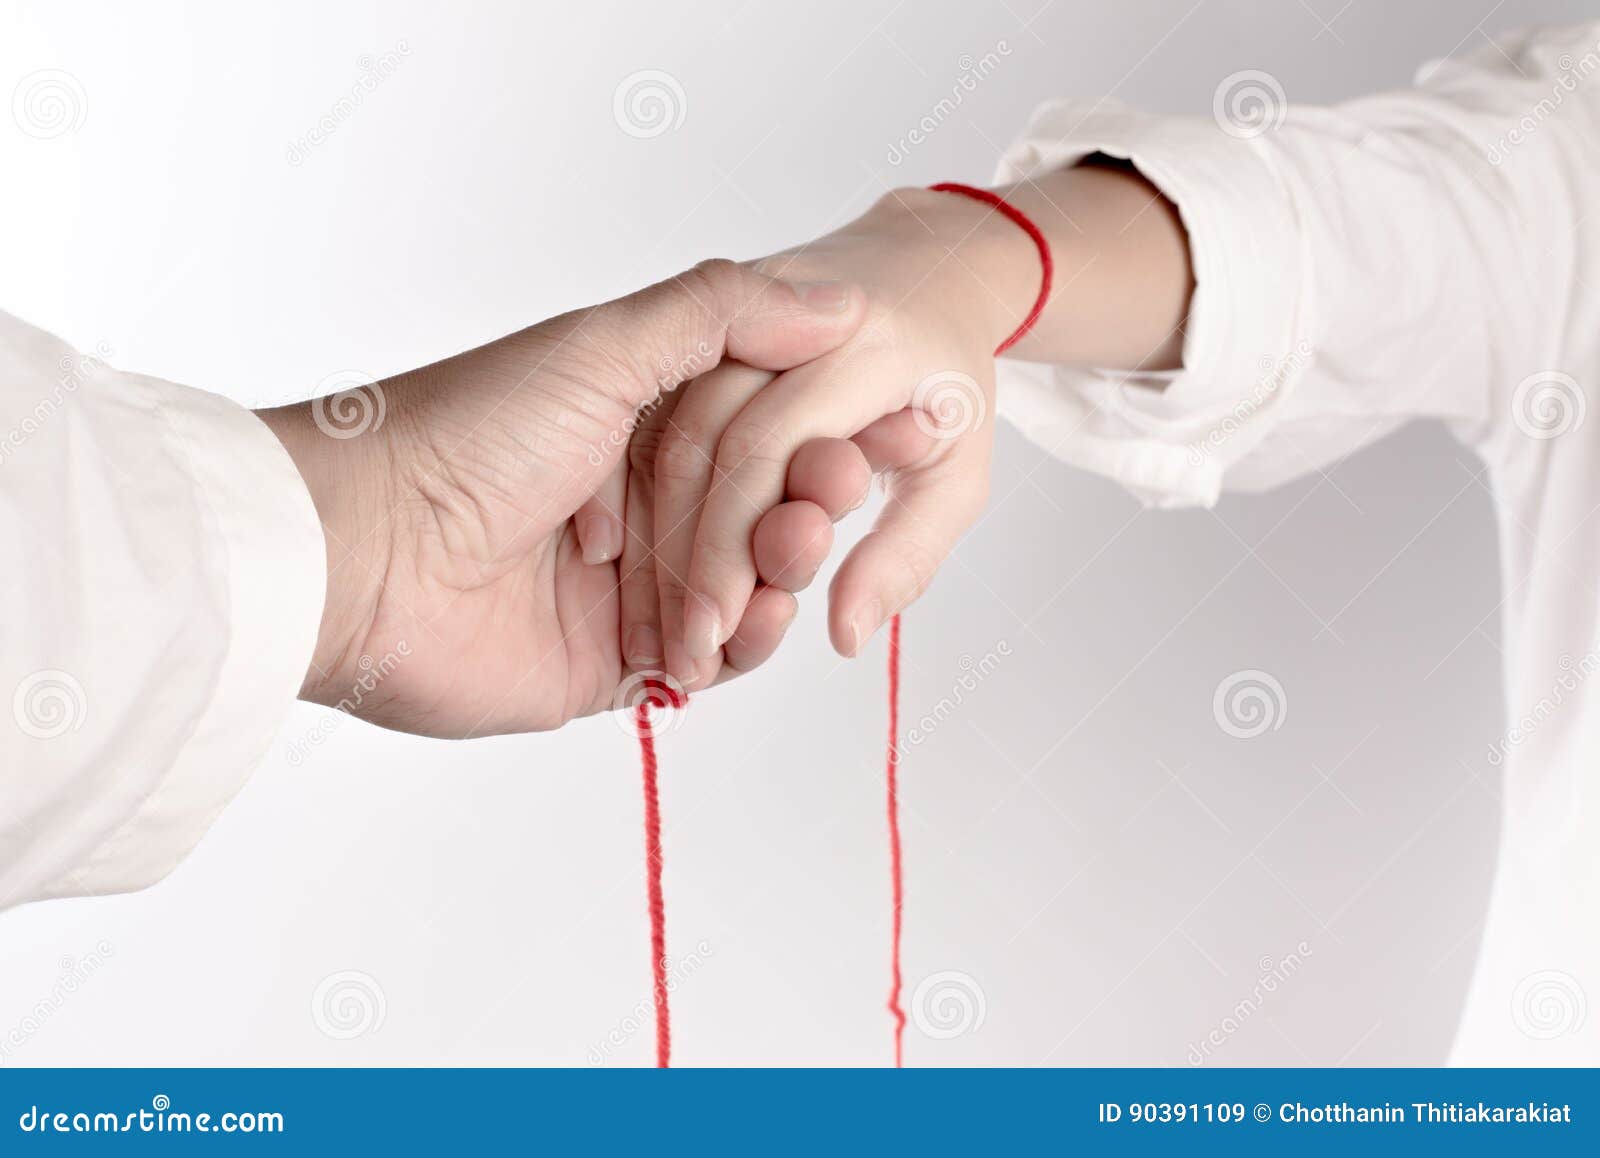 a hand of couple touch each other. the faith of red thread brings destiny